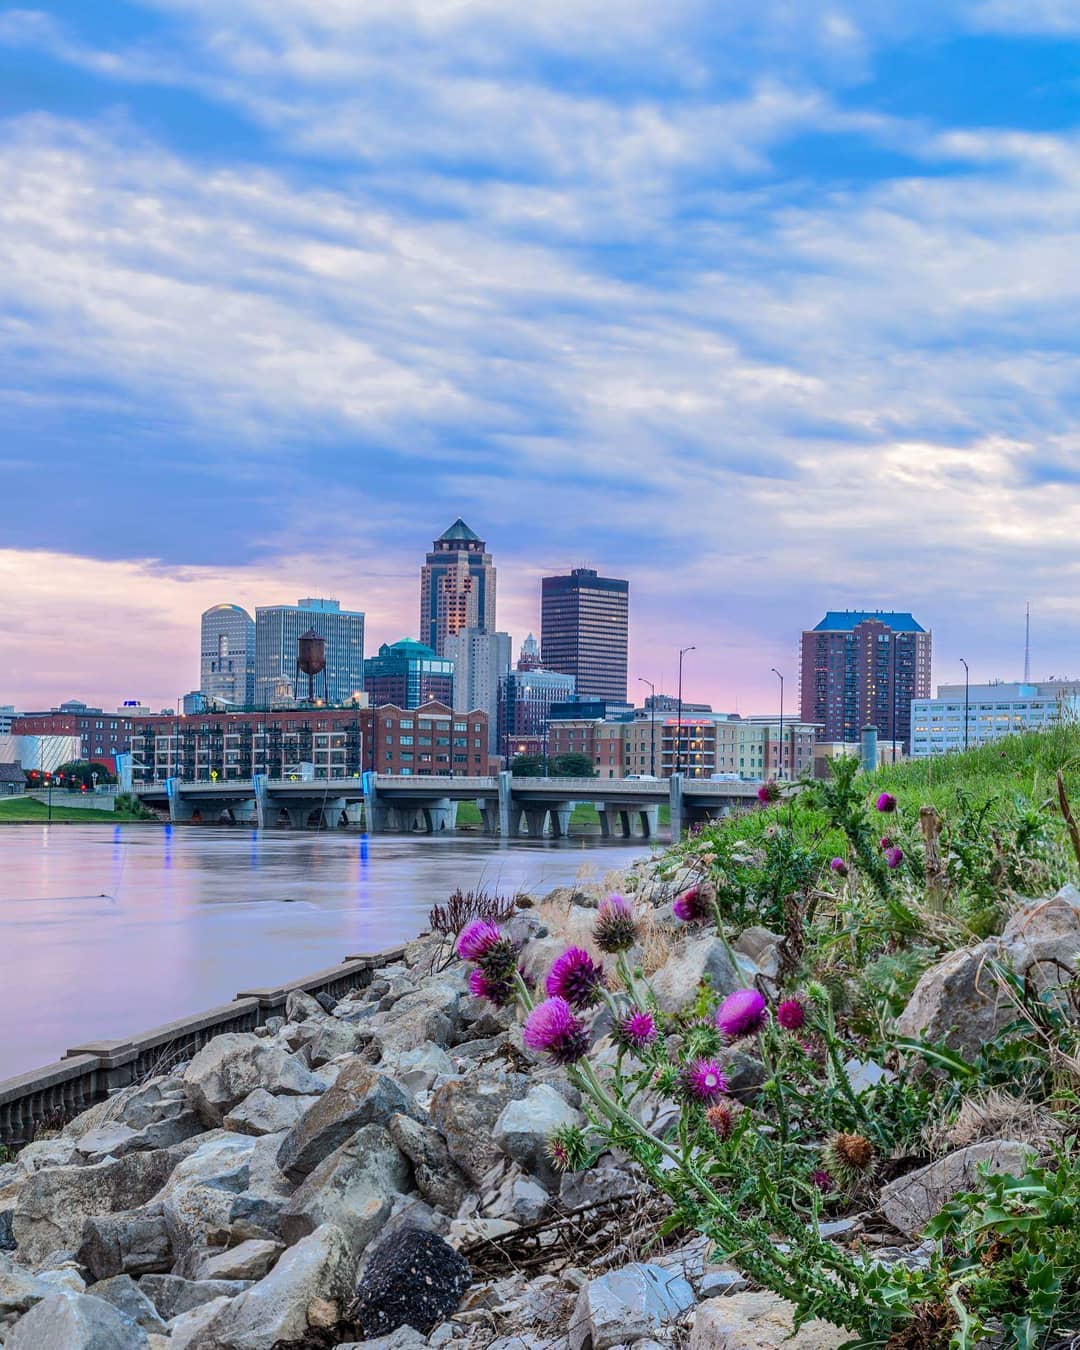 Downtown Des Moines, IA from Across the Des Moines River. Photo by Instagram user @desmoinesskyline